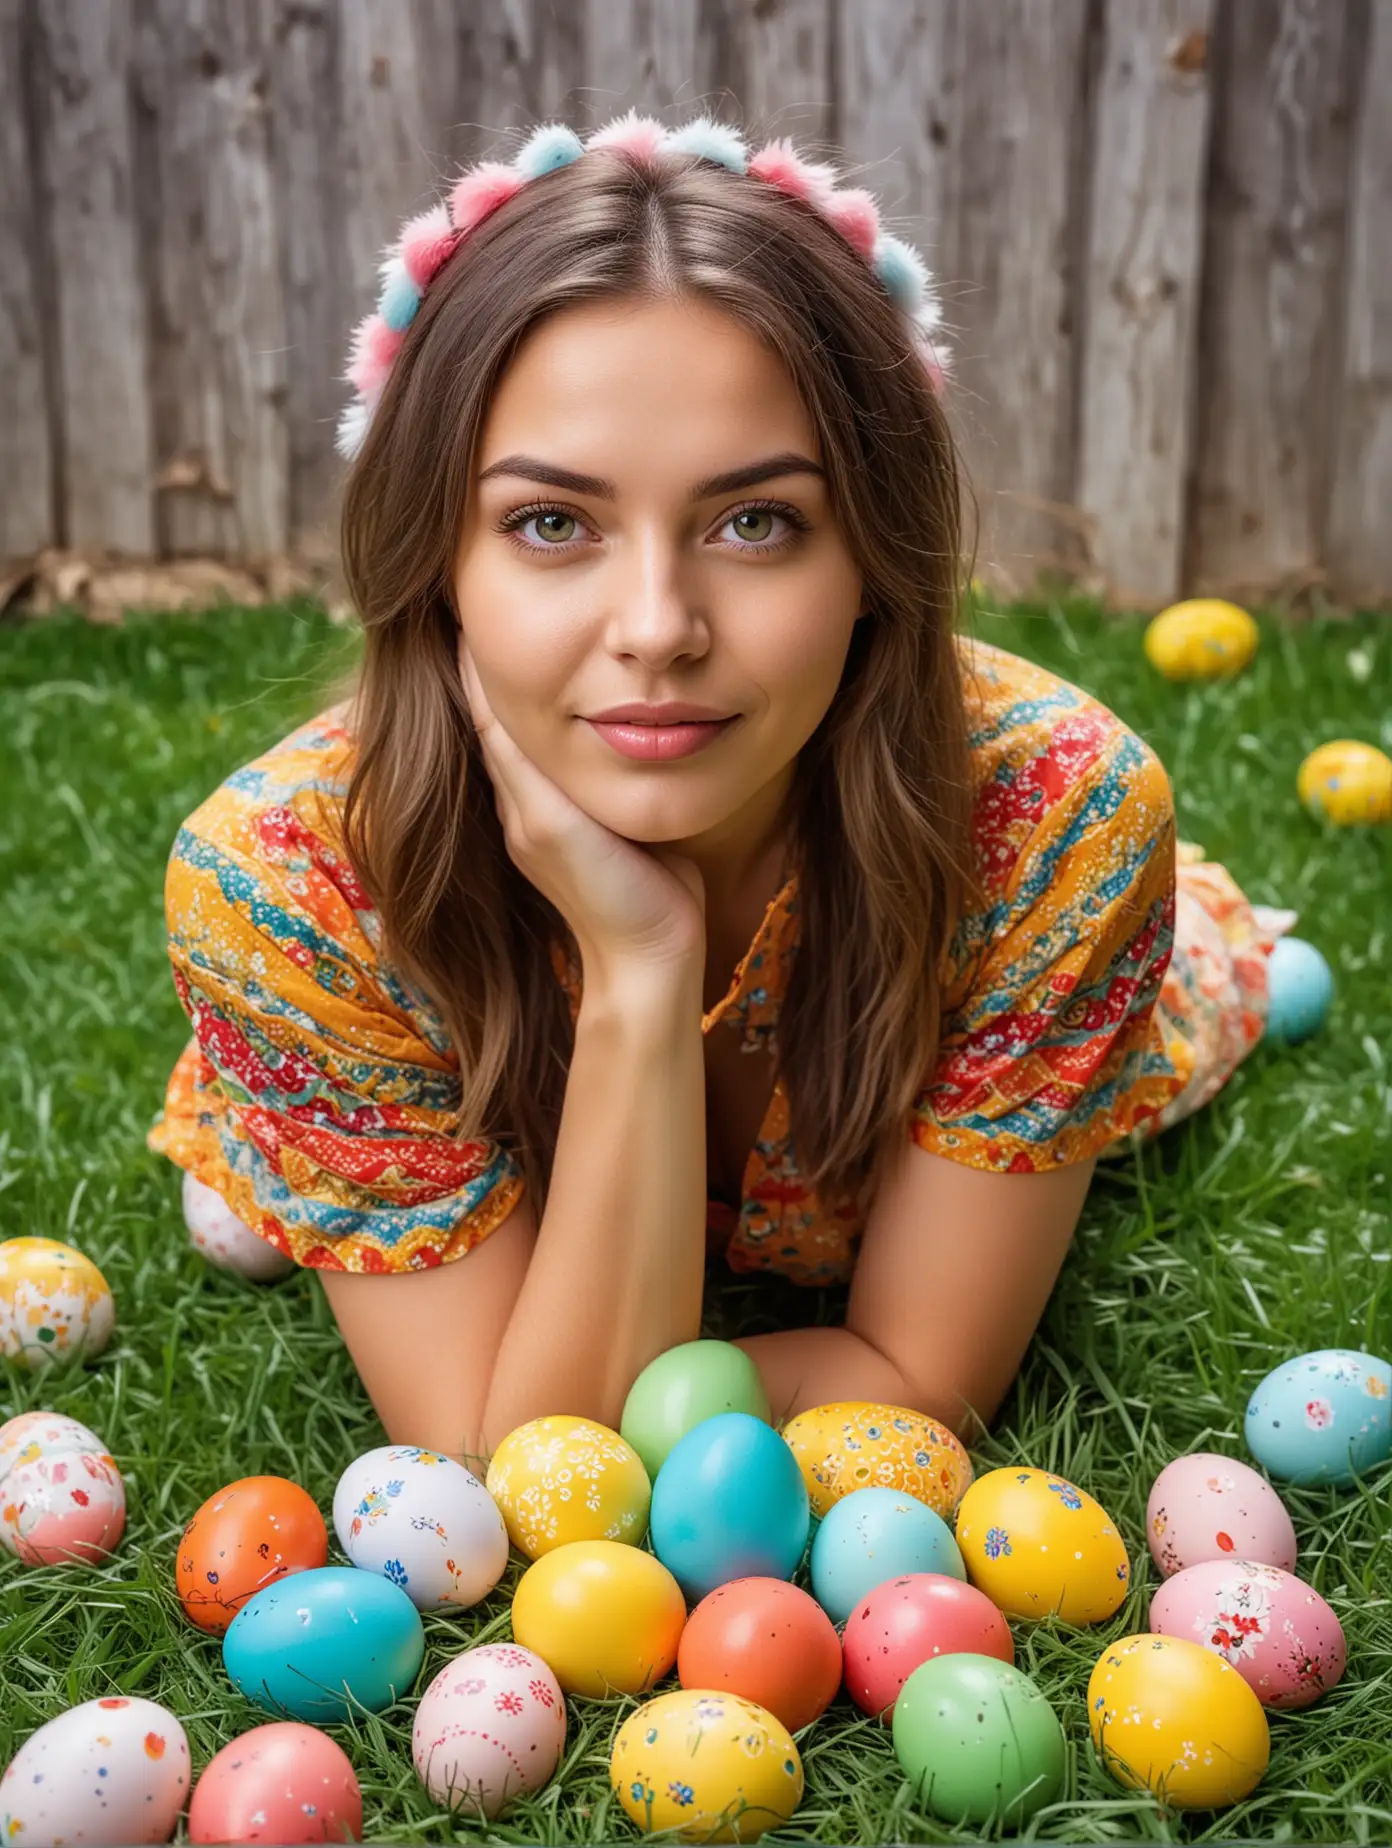 Exquisite Ukrainian Girl Celebrating Easter with Colorful Eggs